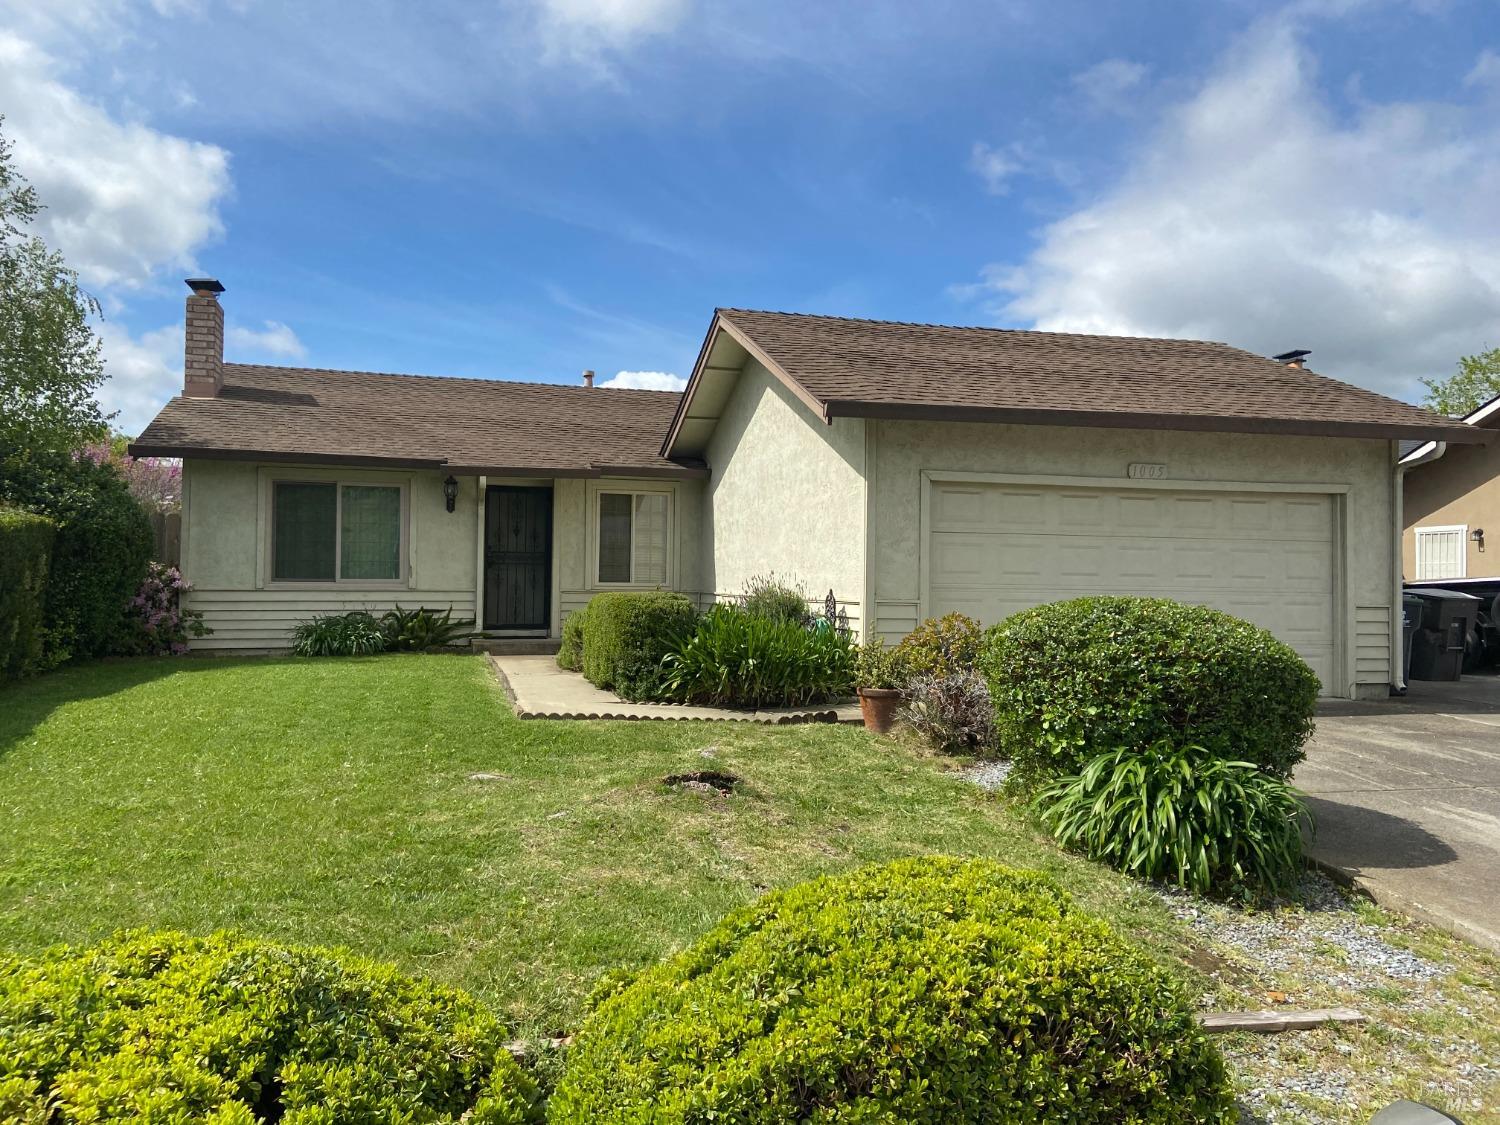 Photo of 1005 Pintail Dr in Suisun City, CA